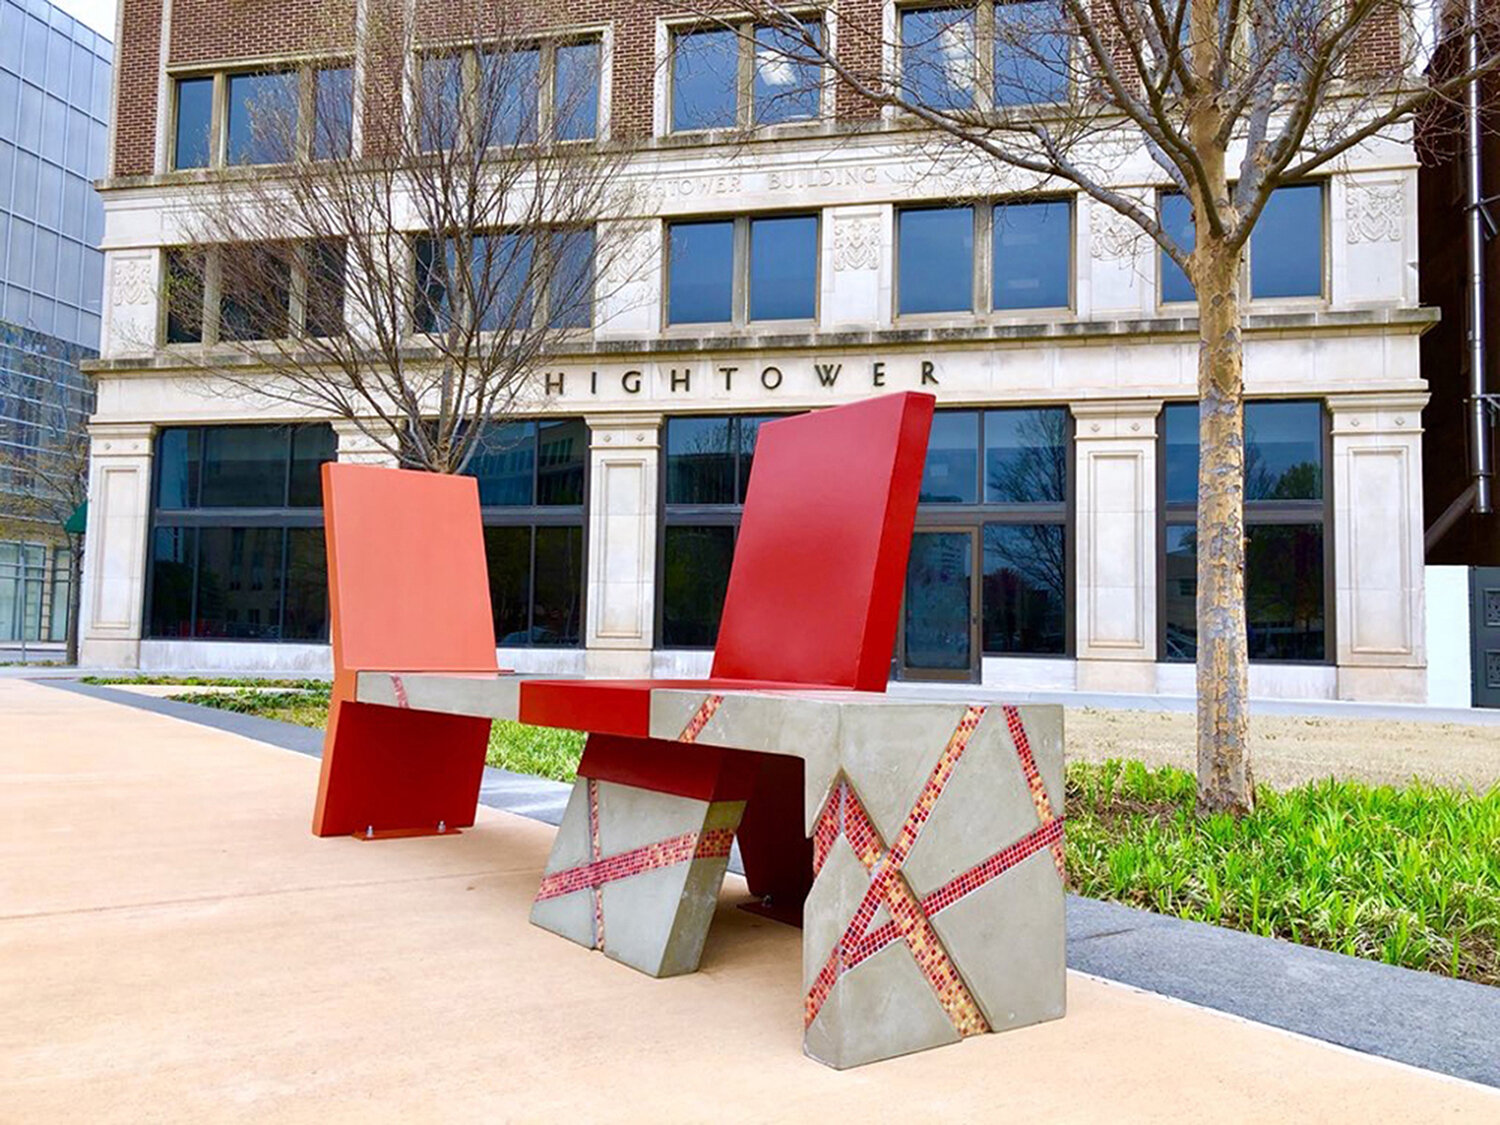 Nurture, Sculptural Seating Group. Outdoor Functional Art in a Public Space